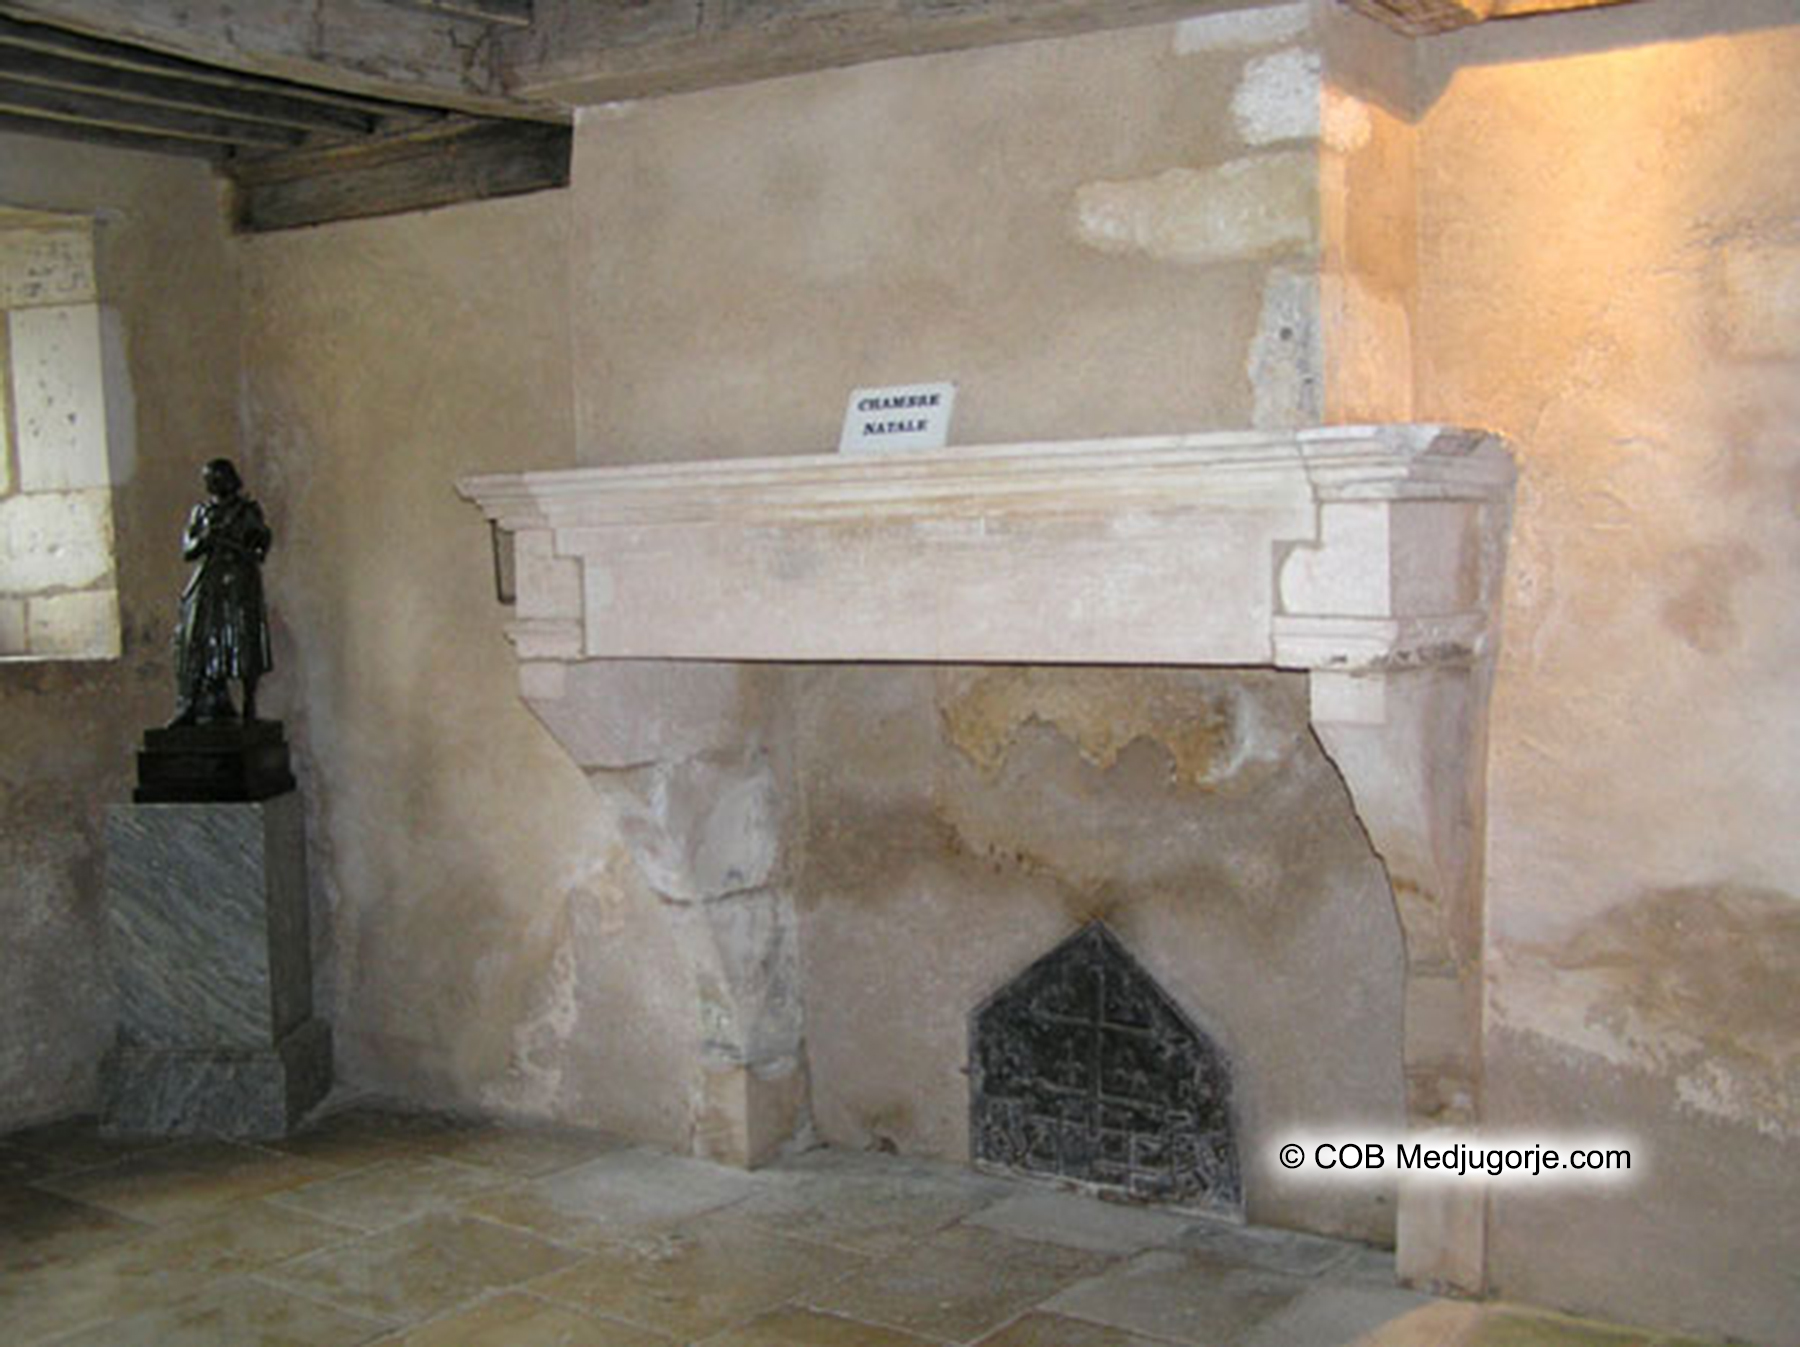 The fireplace in the home of St. Joan of Arc